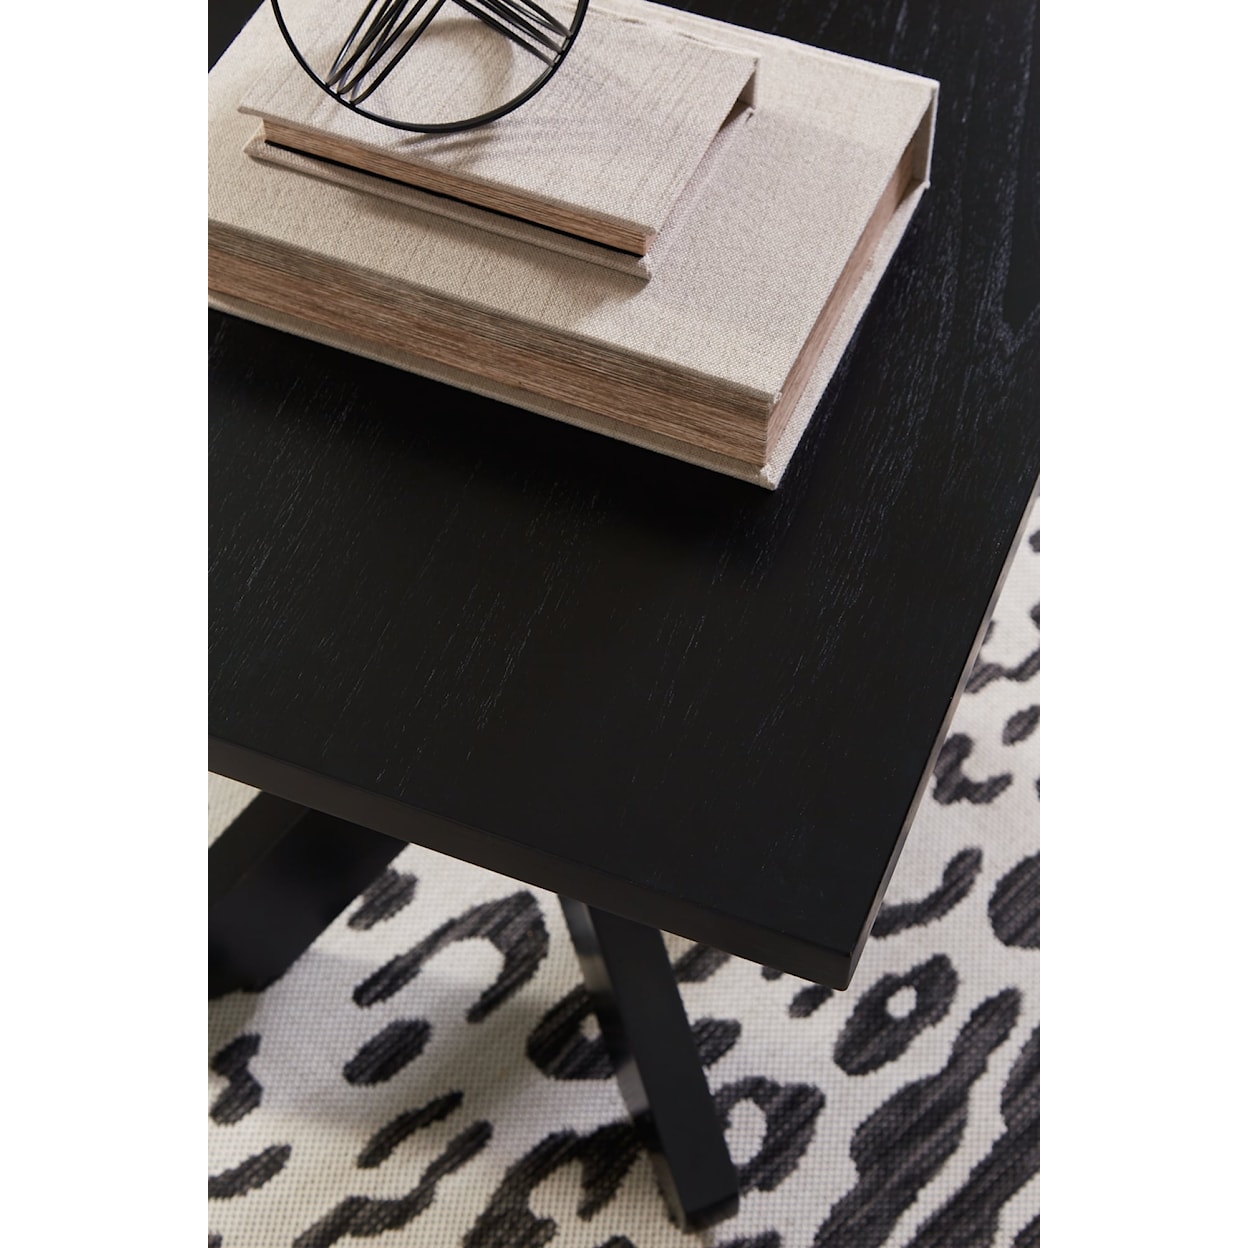 Benchcraft Joshyard Square End Table